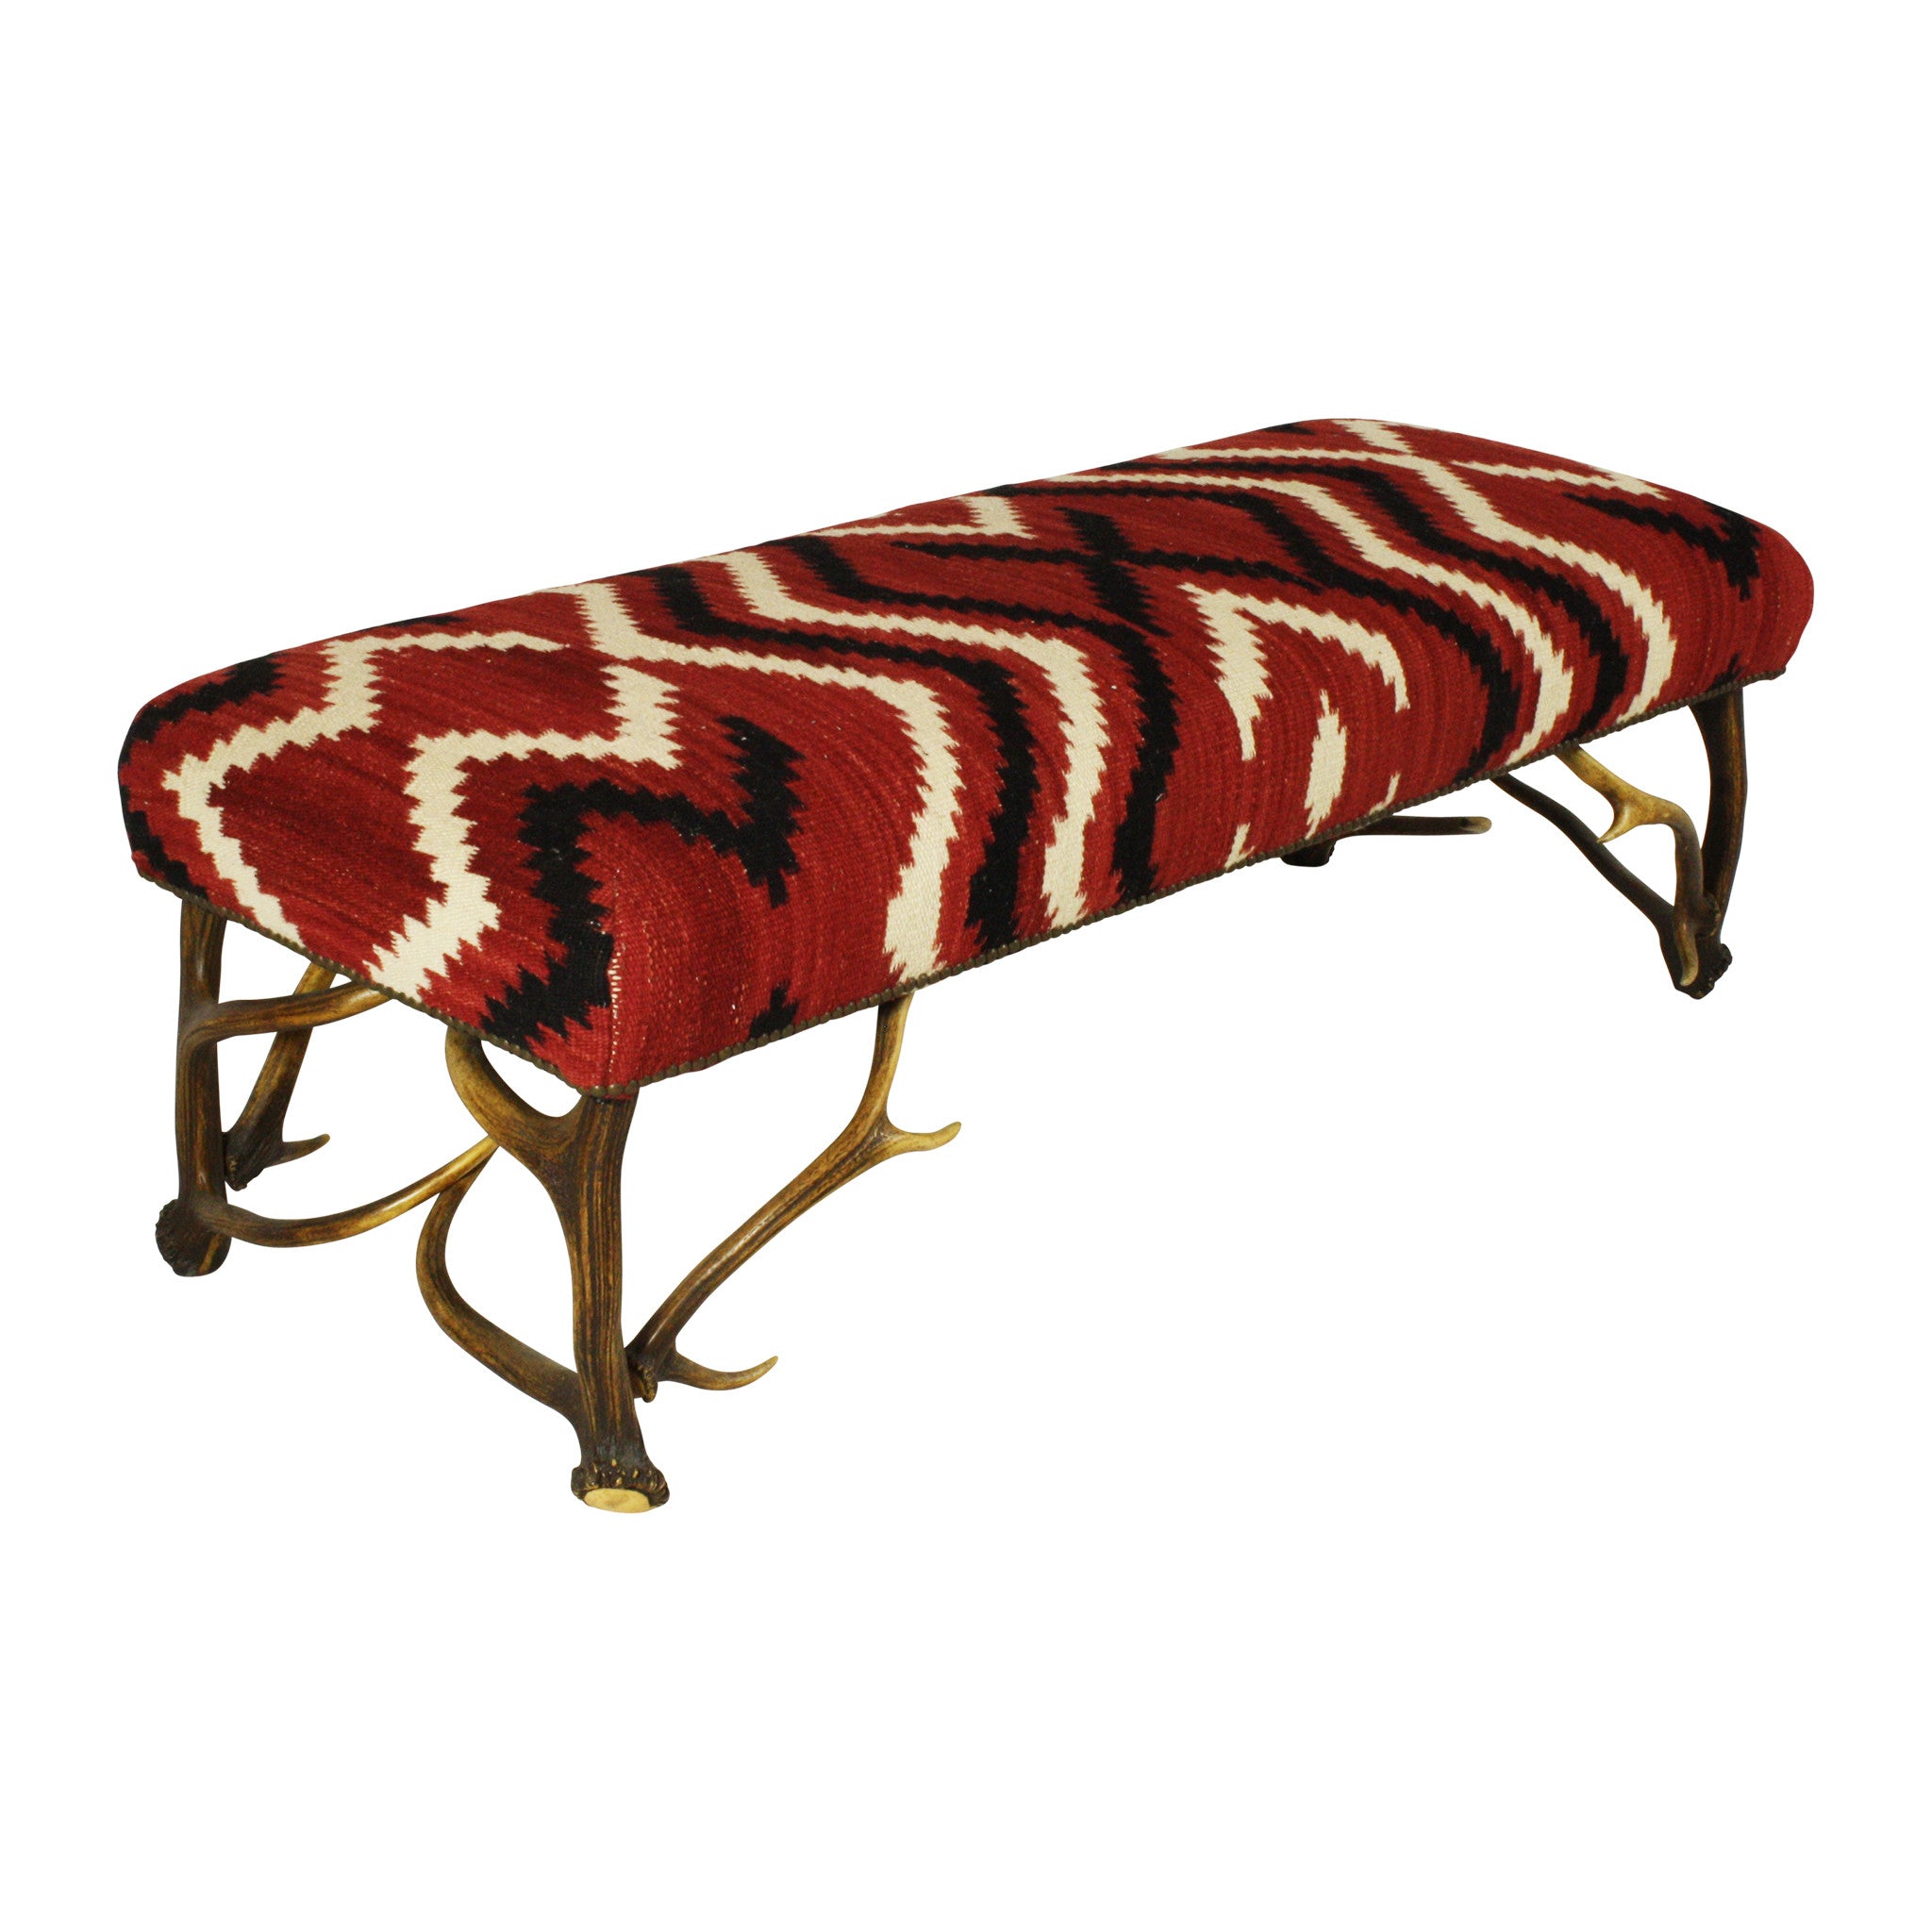 ski-country-antiques - Antler Leg Bench w/ Chief Blanket Fabric